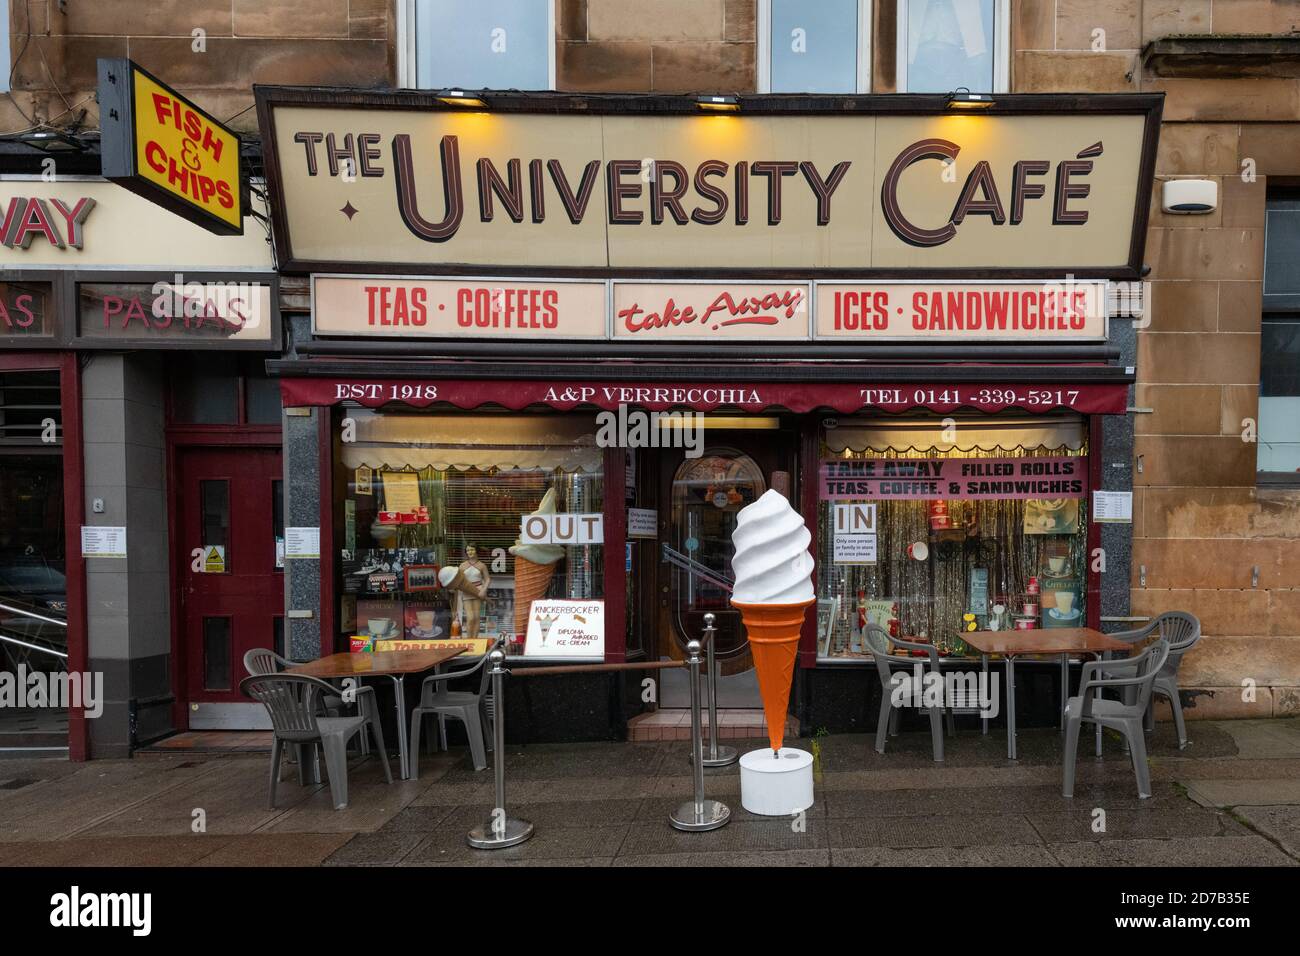 The University Cafe - as a cafe it is able to open during local coronavirus hospitality restrictions, Glasgow, Scotland, UK October 2020 Stock Photo